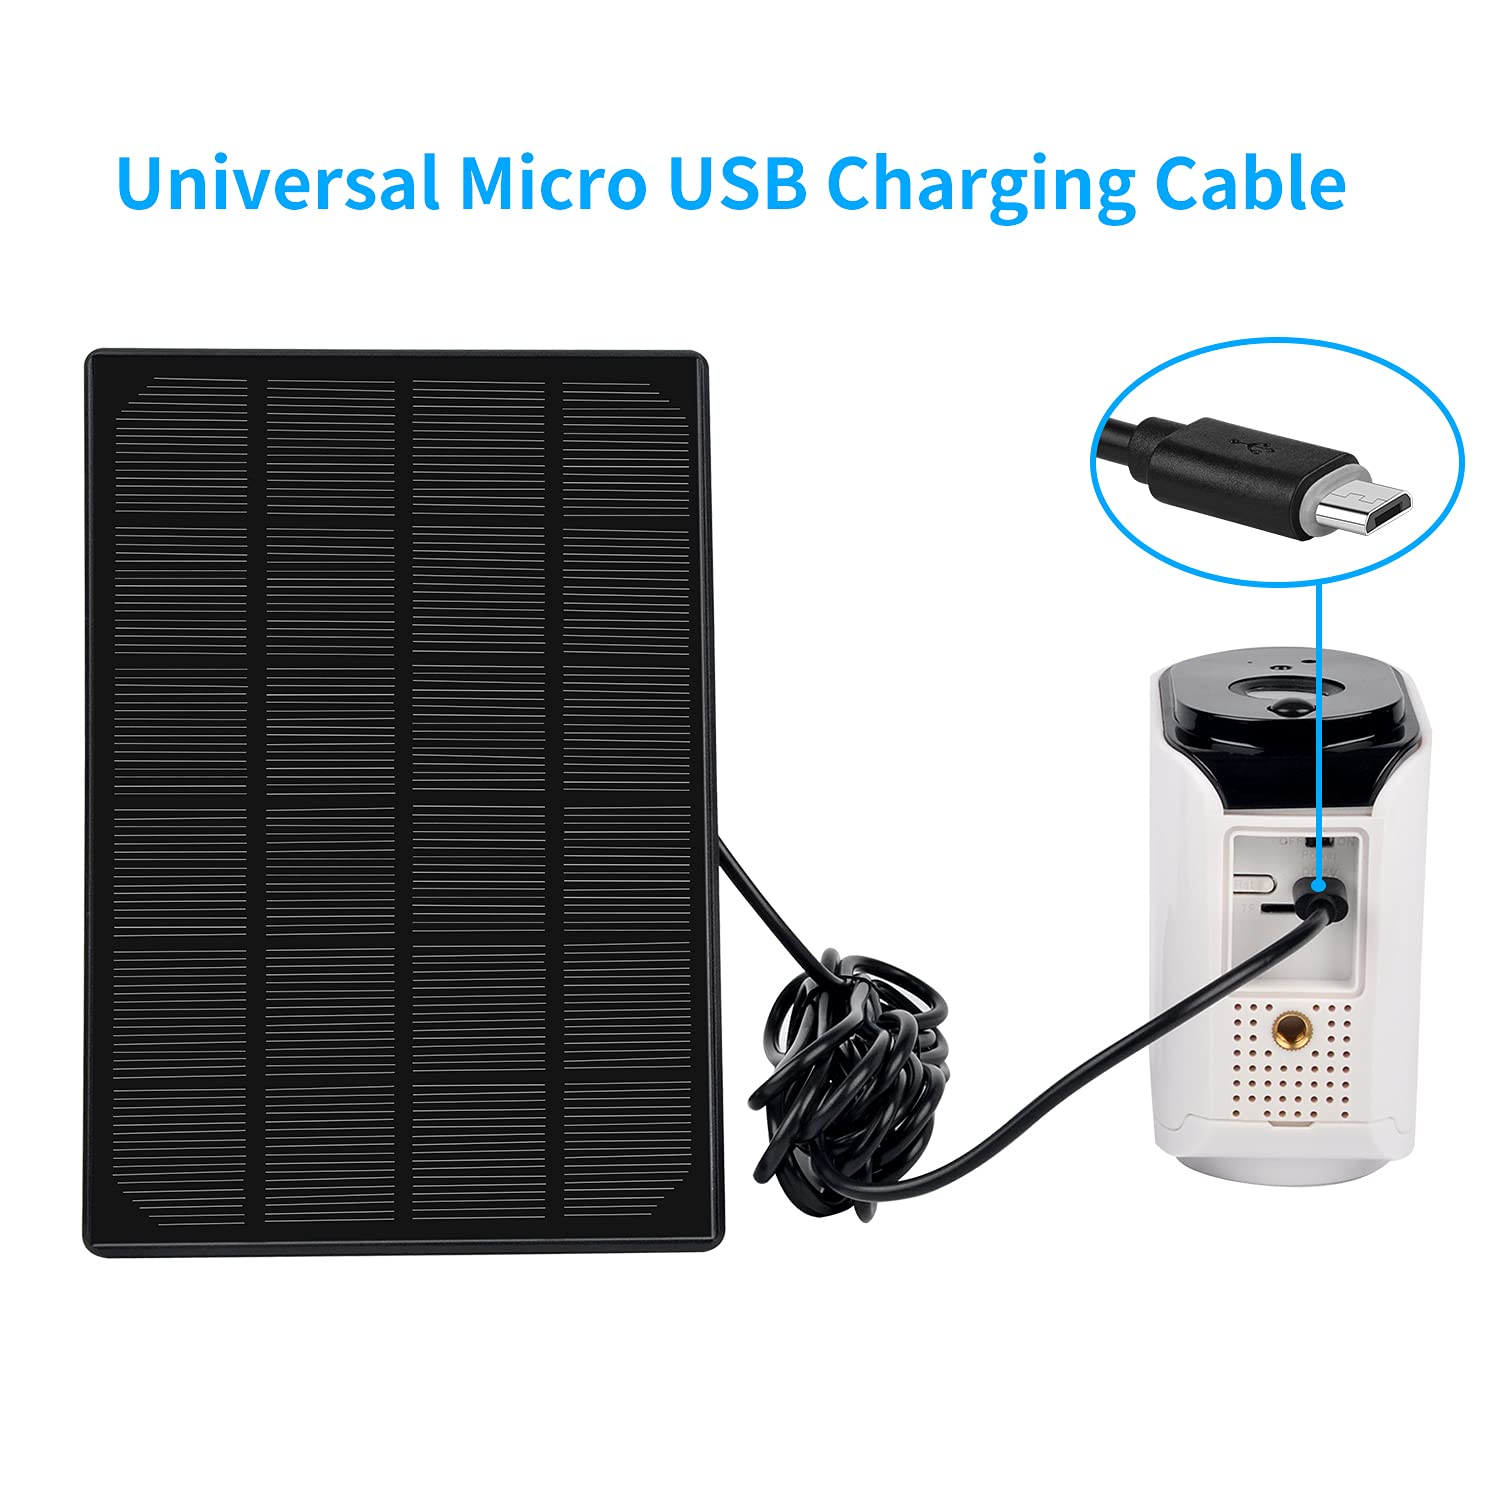 VIEWZONE Solar Panel with Micro USB Cable, Waterproof Solar Panel Power Supply Compatible with Outdoor Rechargeable Battery Security Camera, 5V 3.5W Continuously Charging, Plug and Play